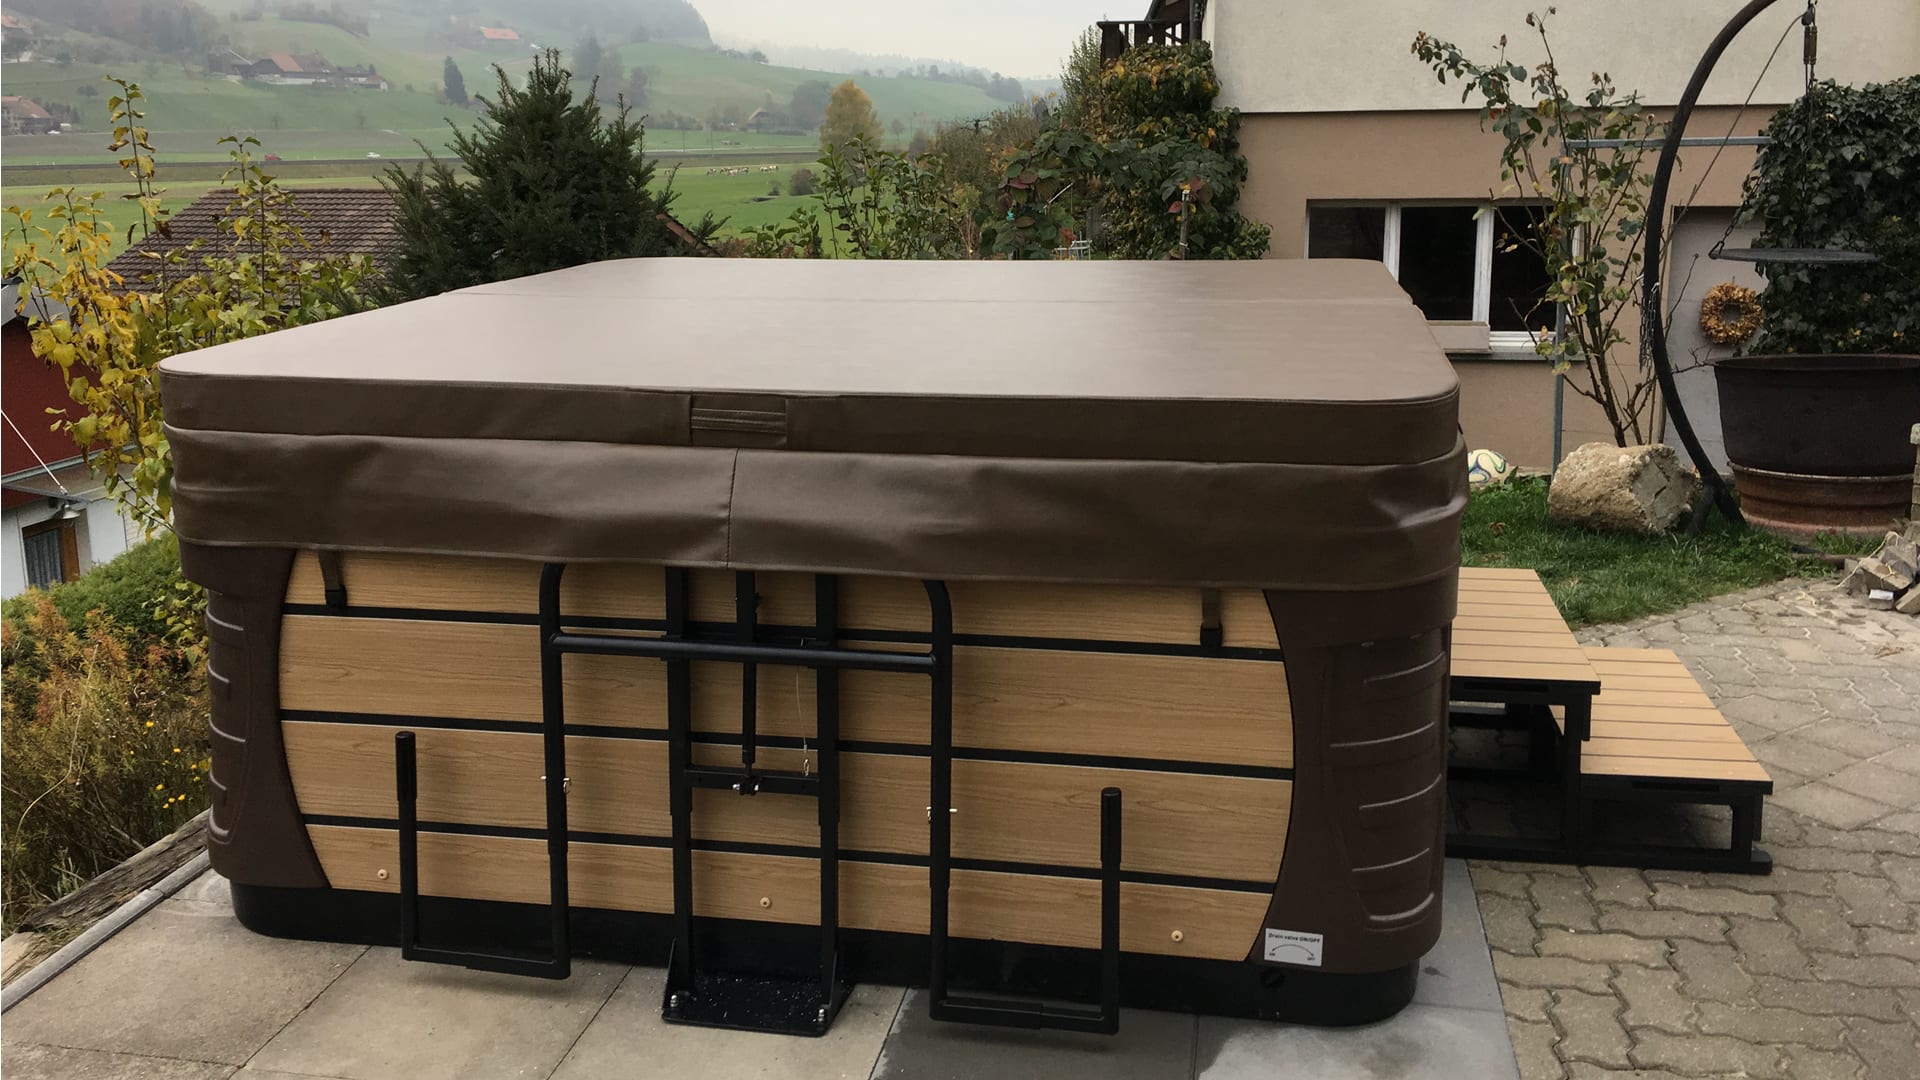 Outdoor Whirlpool Fast & Furious Serie